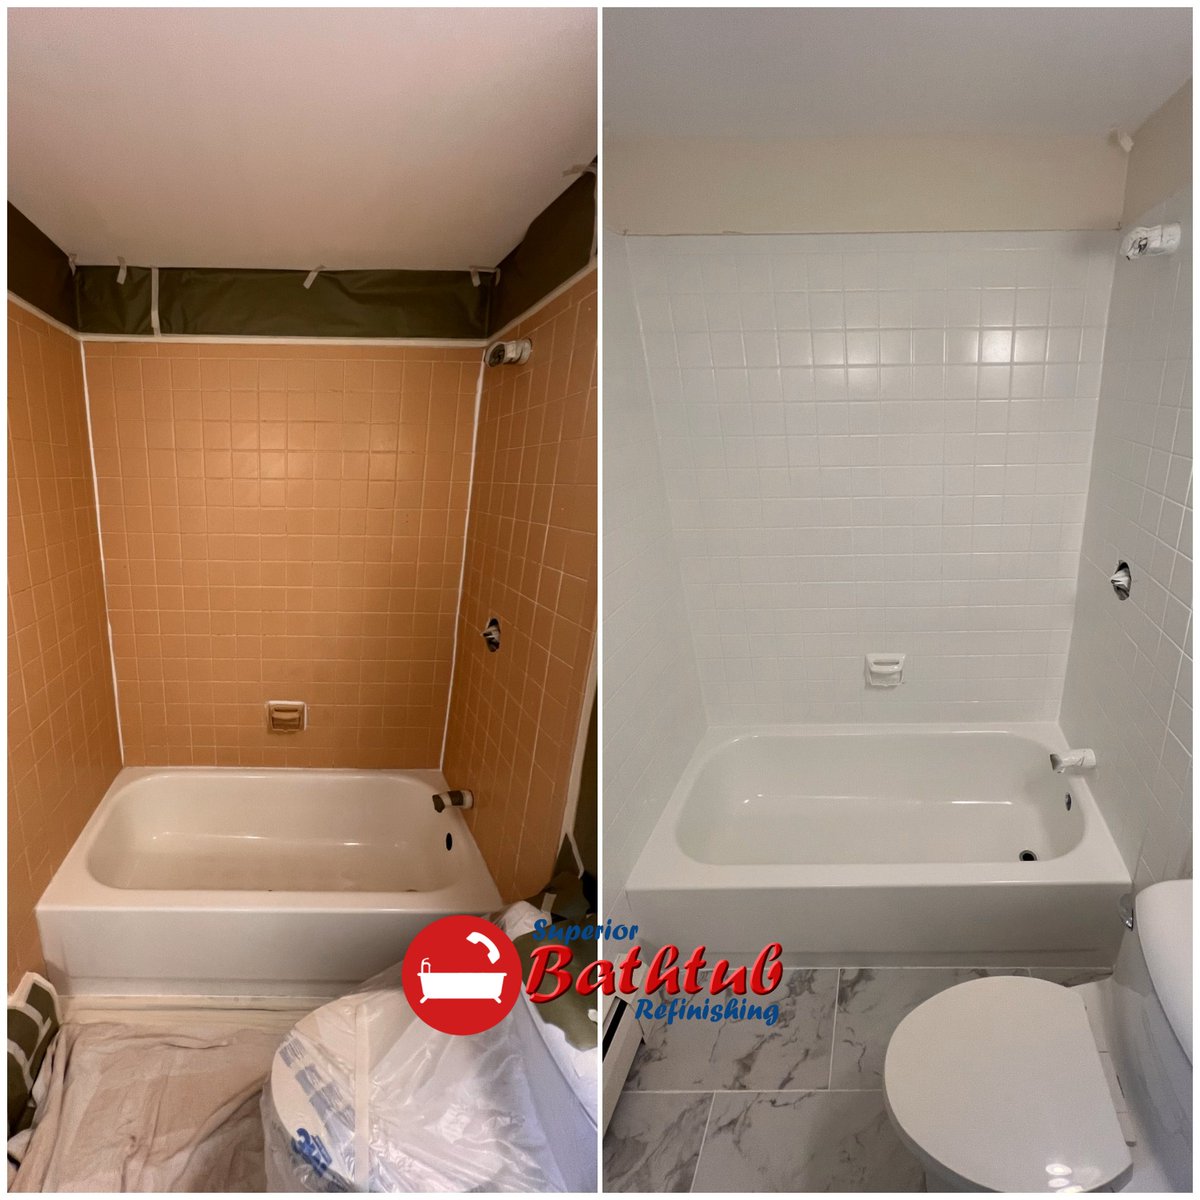 Revitalize your bathroom with Superior Bathtub Refinishing! Say goodbye to worn-out tubs and hello to a fresh, new look. Get a free quote: superiorbathtubrefinishing.com or call us: (781) 640-8981.

#BathtubRefinishing #BathroomMakeover #SuperiorQuality #HomeImprovement #Renovation